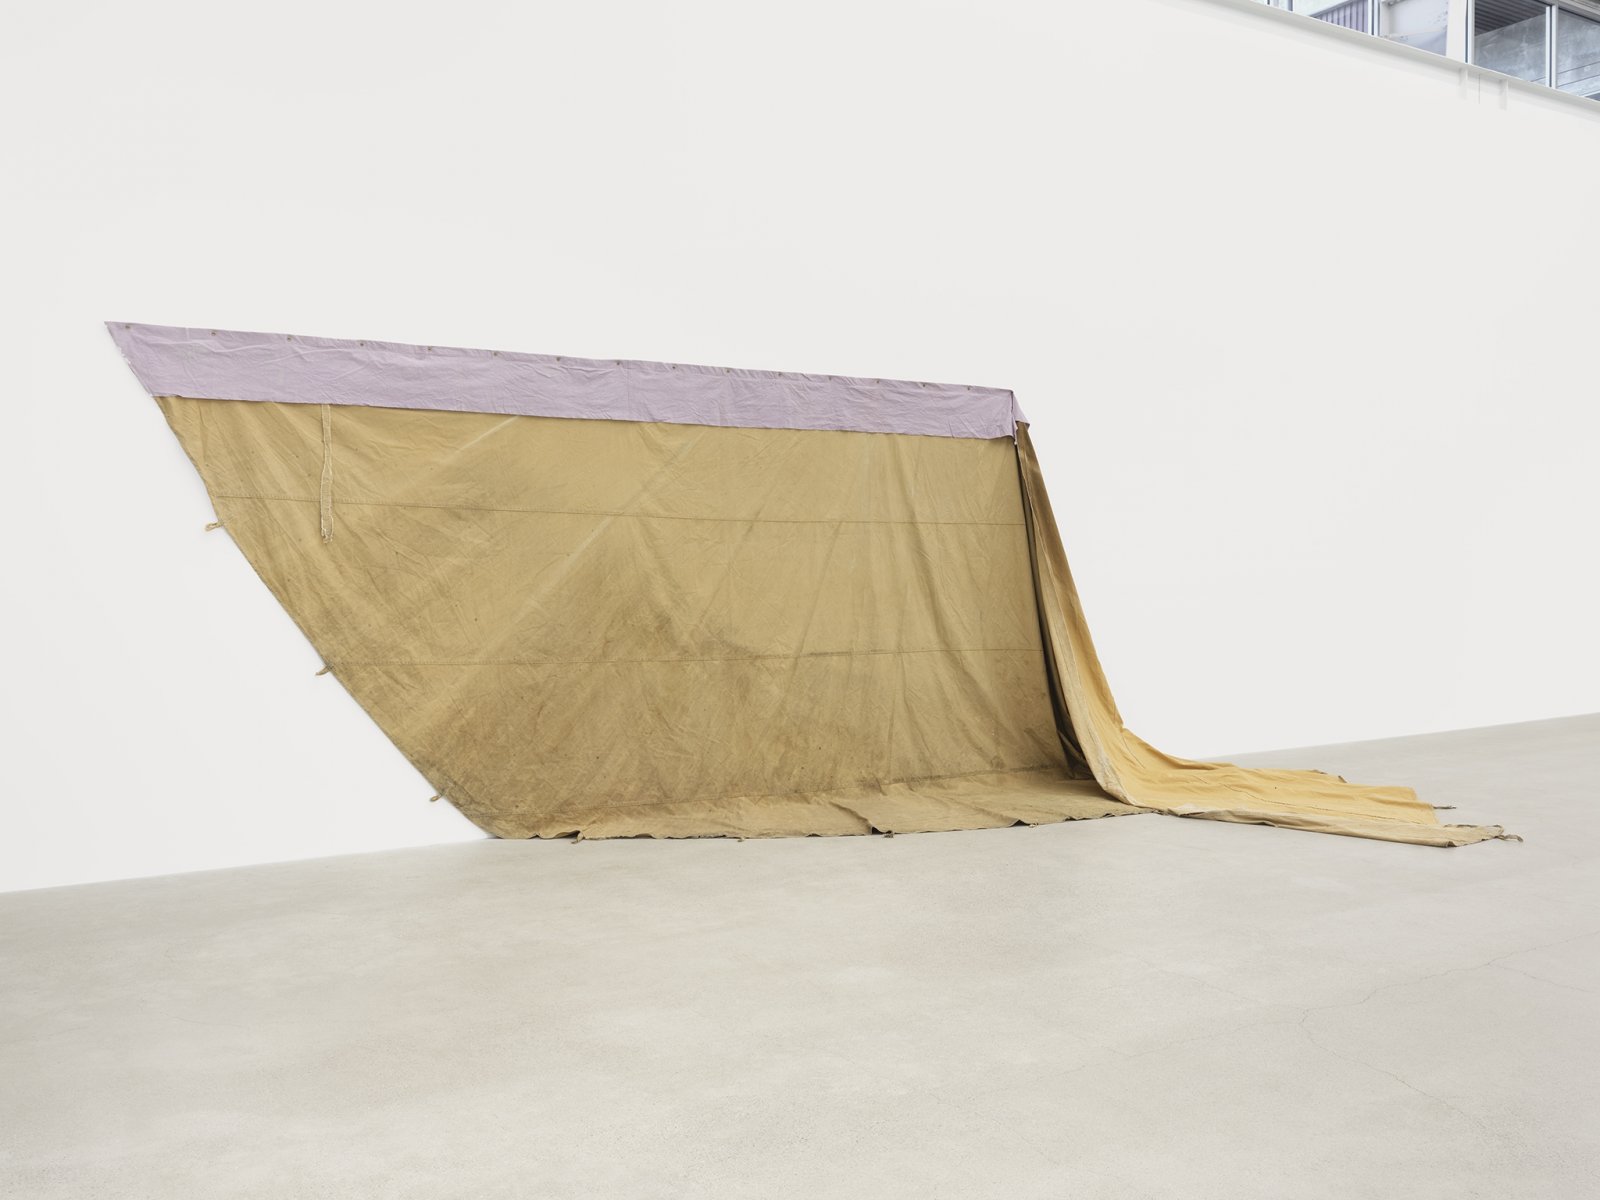 Duane Linklater, a gift from Doreen, 2016–2019, hand-dyed canvas, teepee canvas, blueberry extract, grommets, nails, 108 x 270 x 123 in. (274 x 686 x 312 cm)